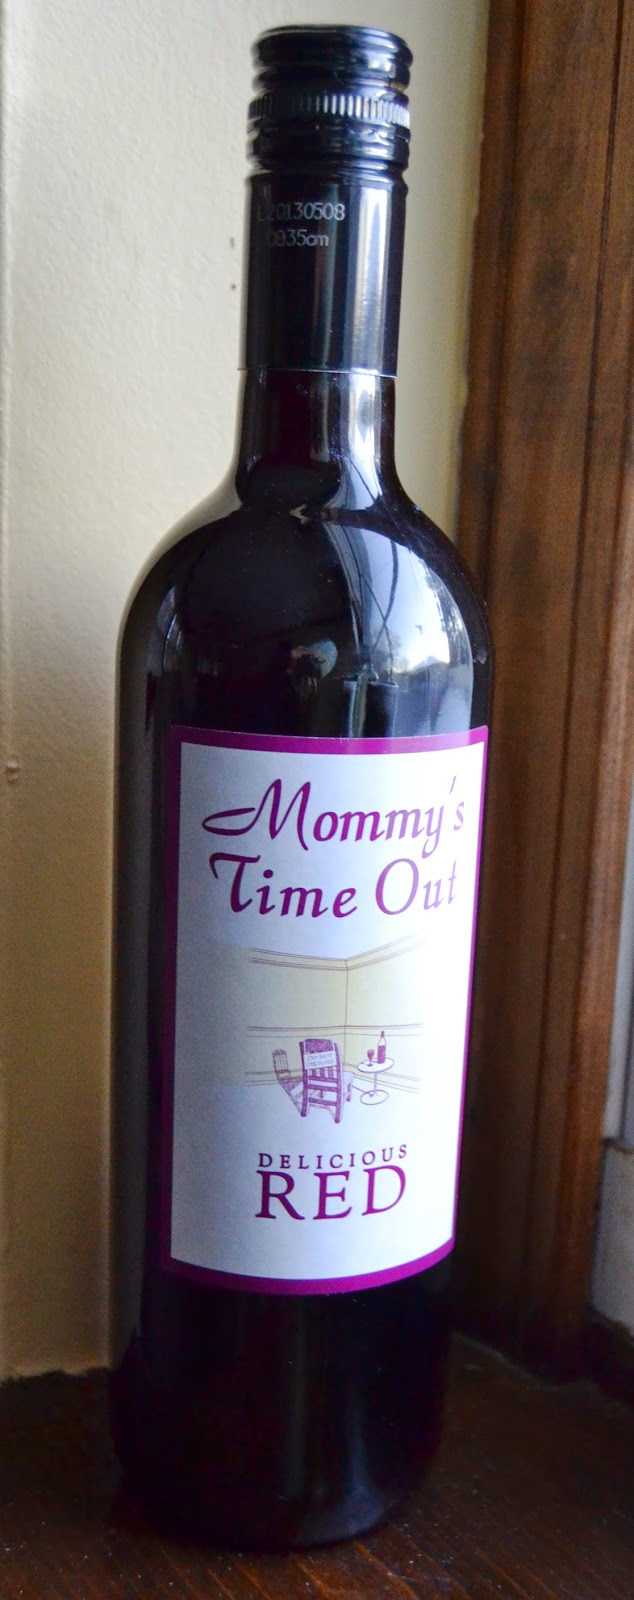 Mommy's Time Out wine